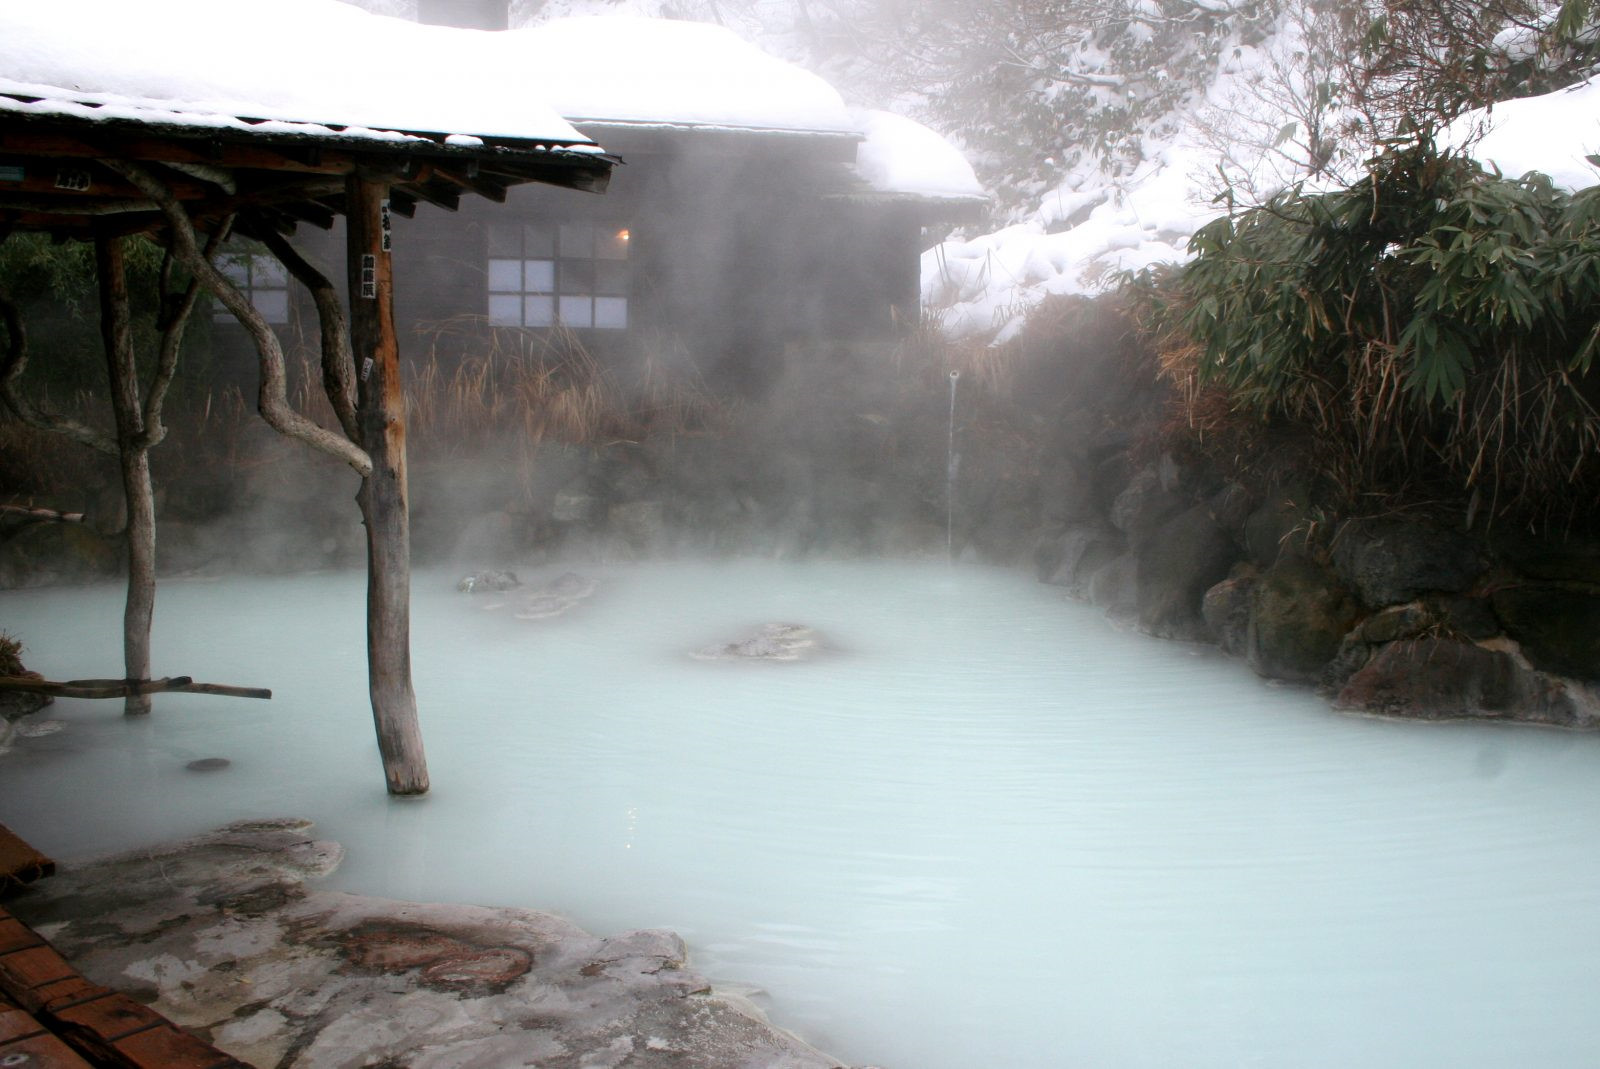 Hot springs not only bring a sense of relaxation, but also provide many hea...